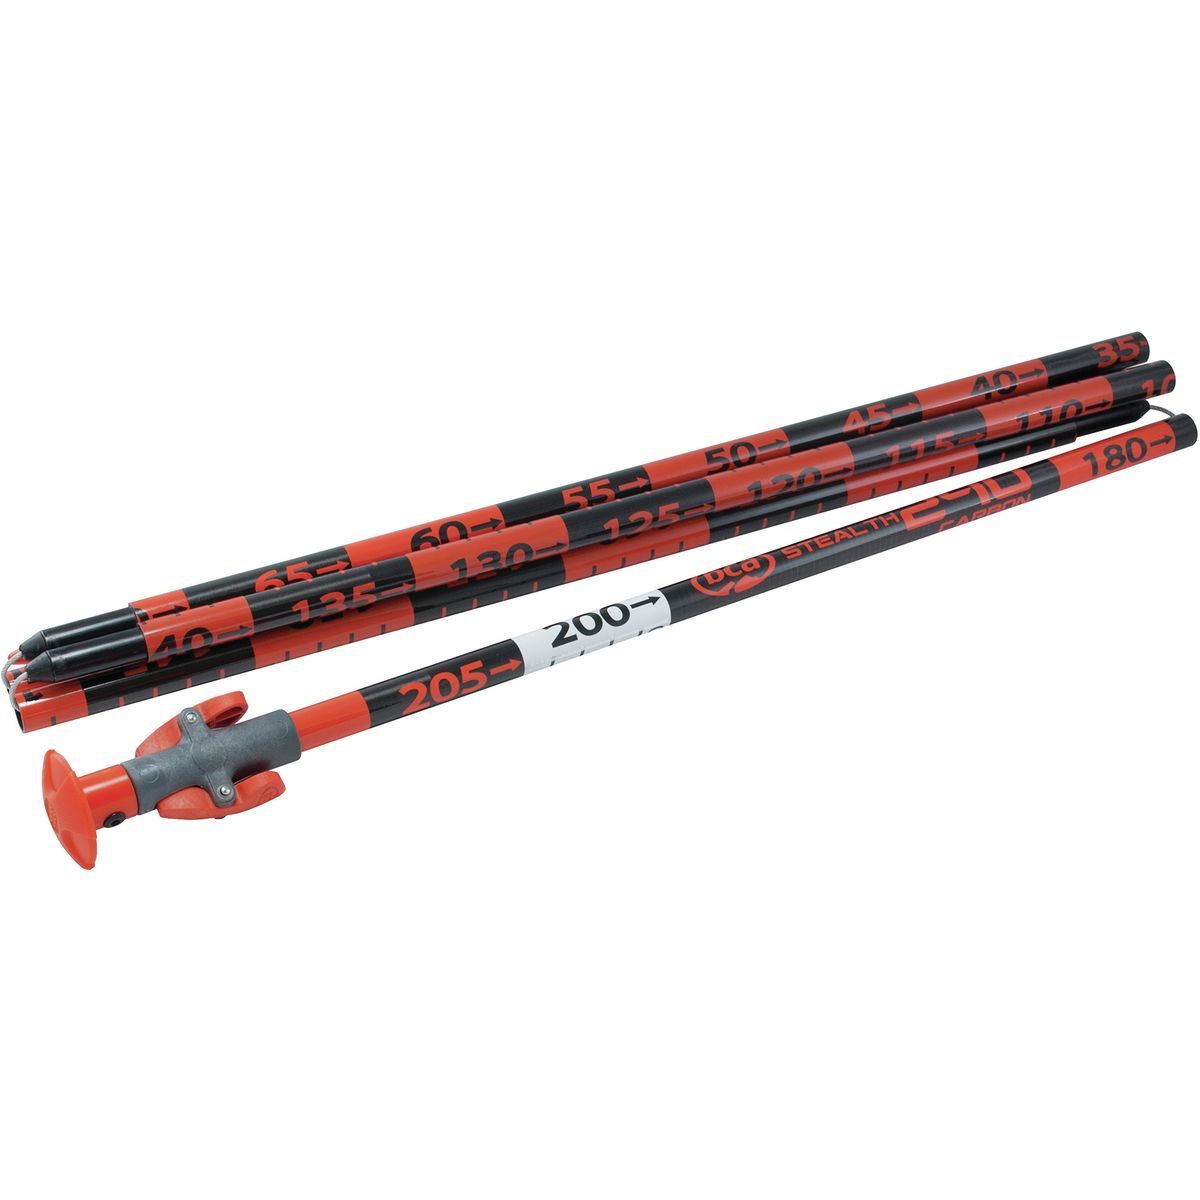 Backcountry Access Stealth 240 Probe